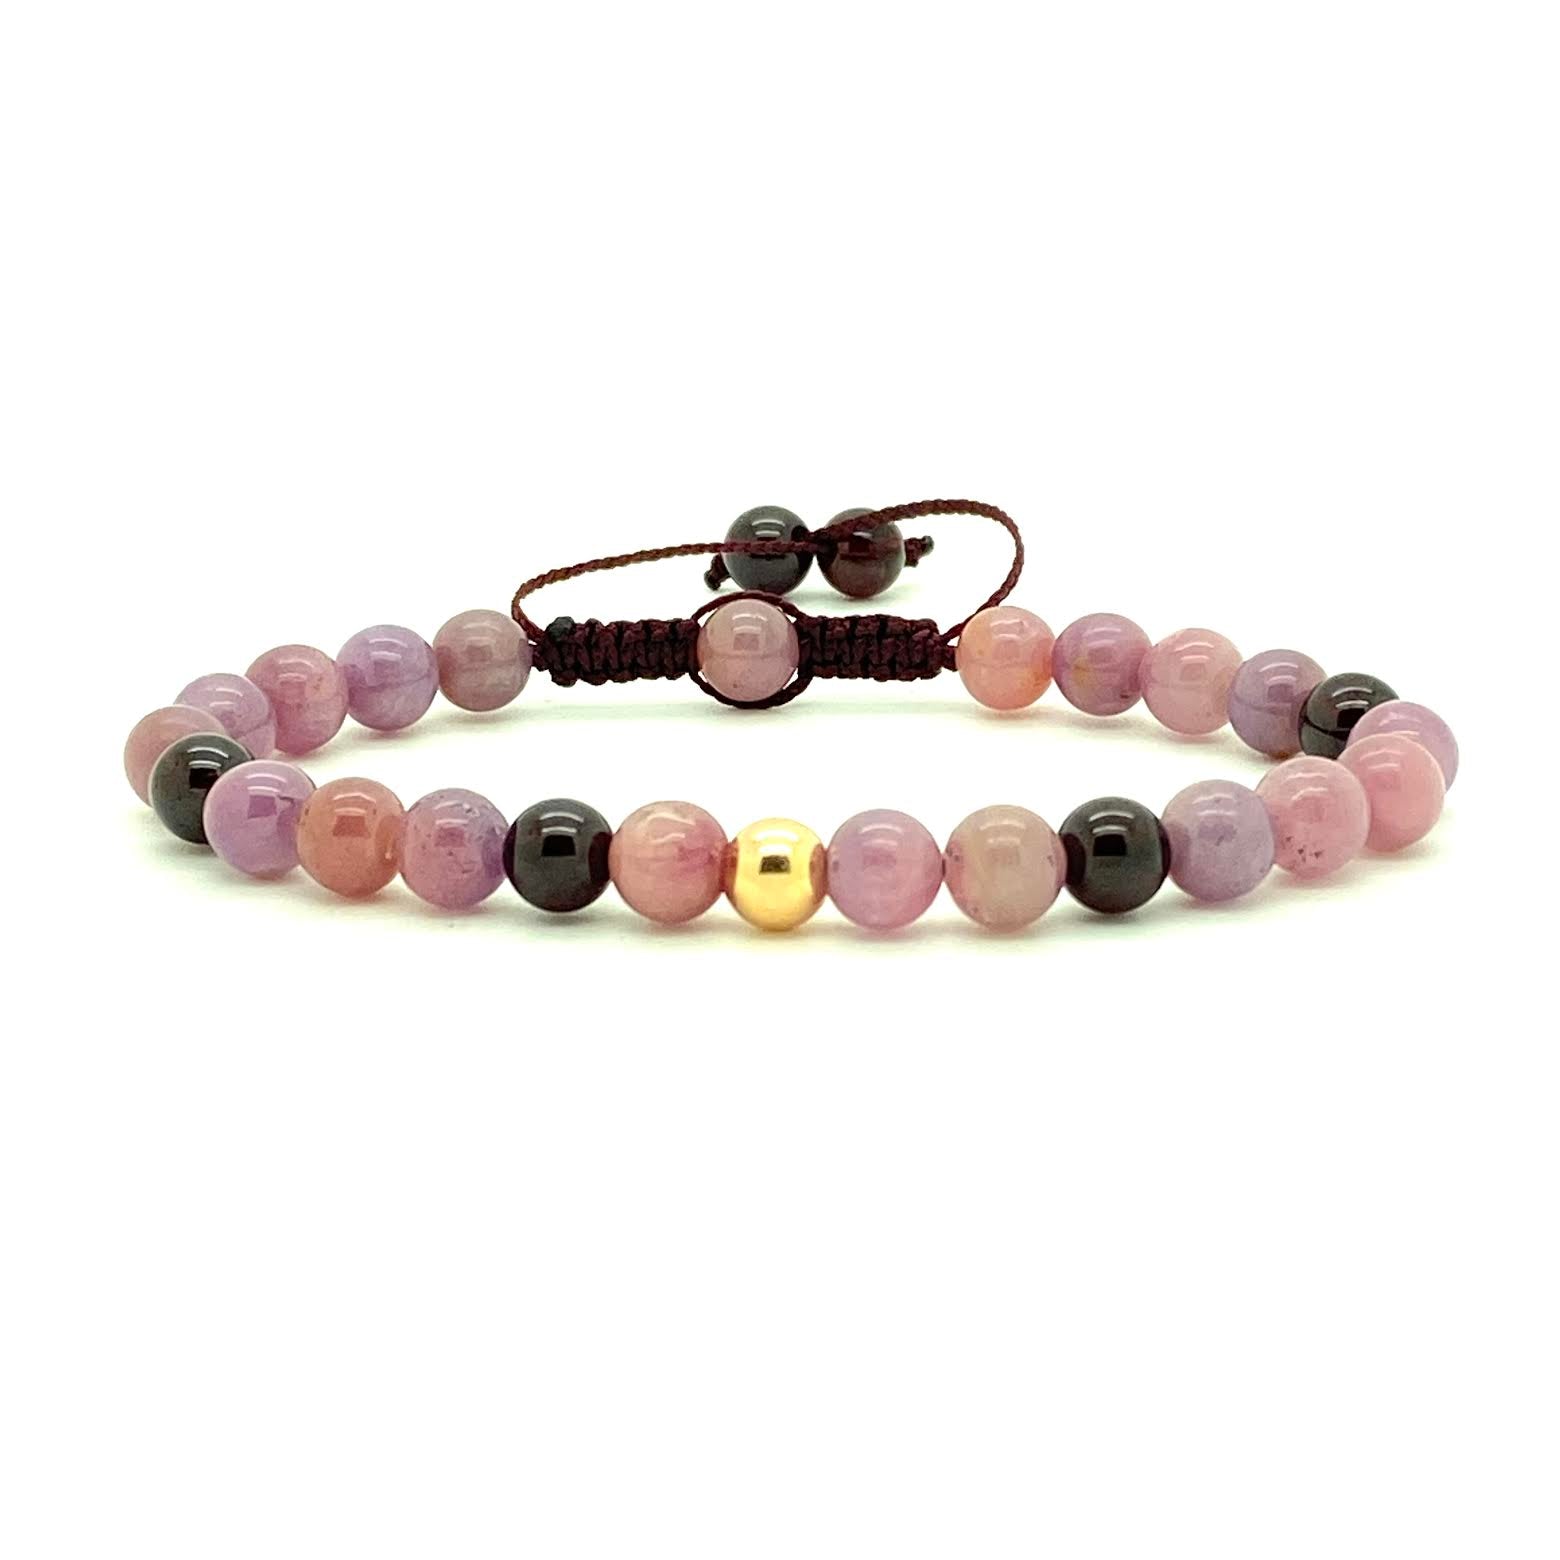 Pink Rubies honor the higher mind, bringing intuition, clarity and self-mastery. These smooth pink variety gemstones are accented with Garnet beads and your choice of a 14K solid yellow, rose or white gold bead. Hand knotted adjustable cord for a perfect fit. Made by WristBend  